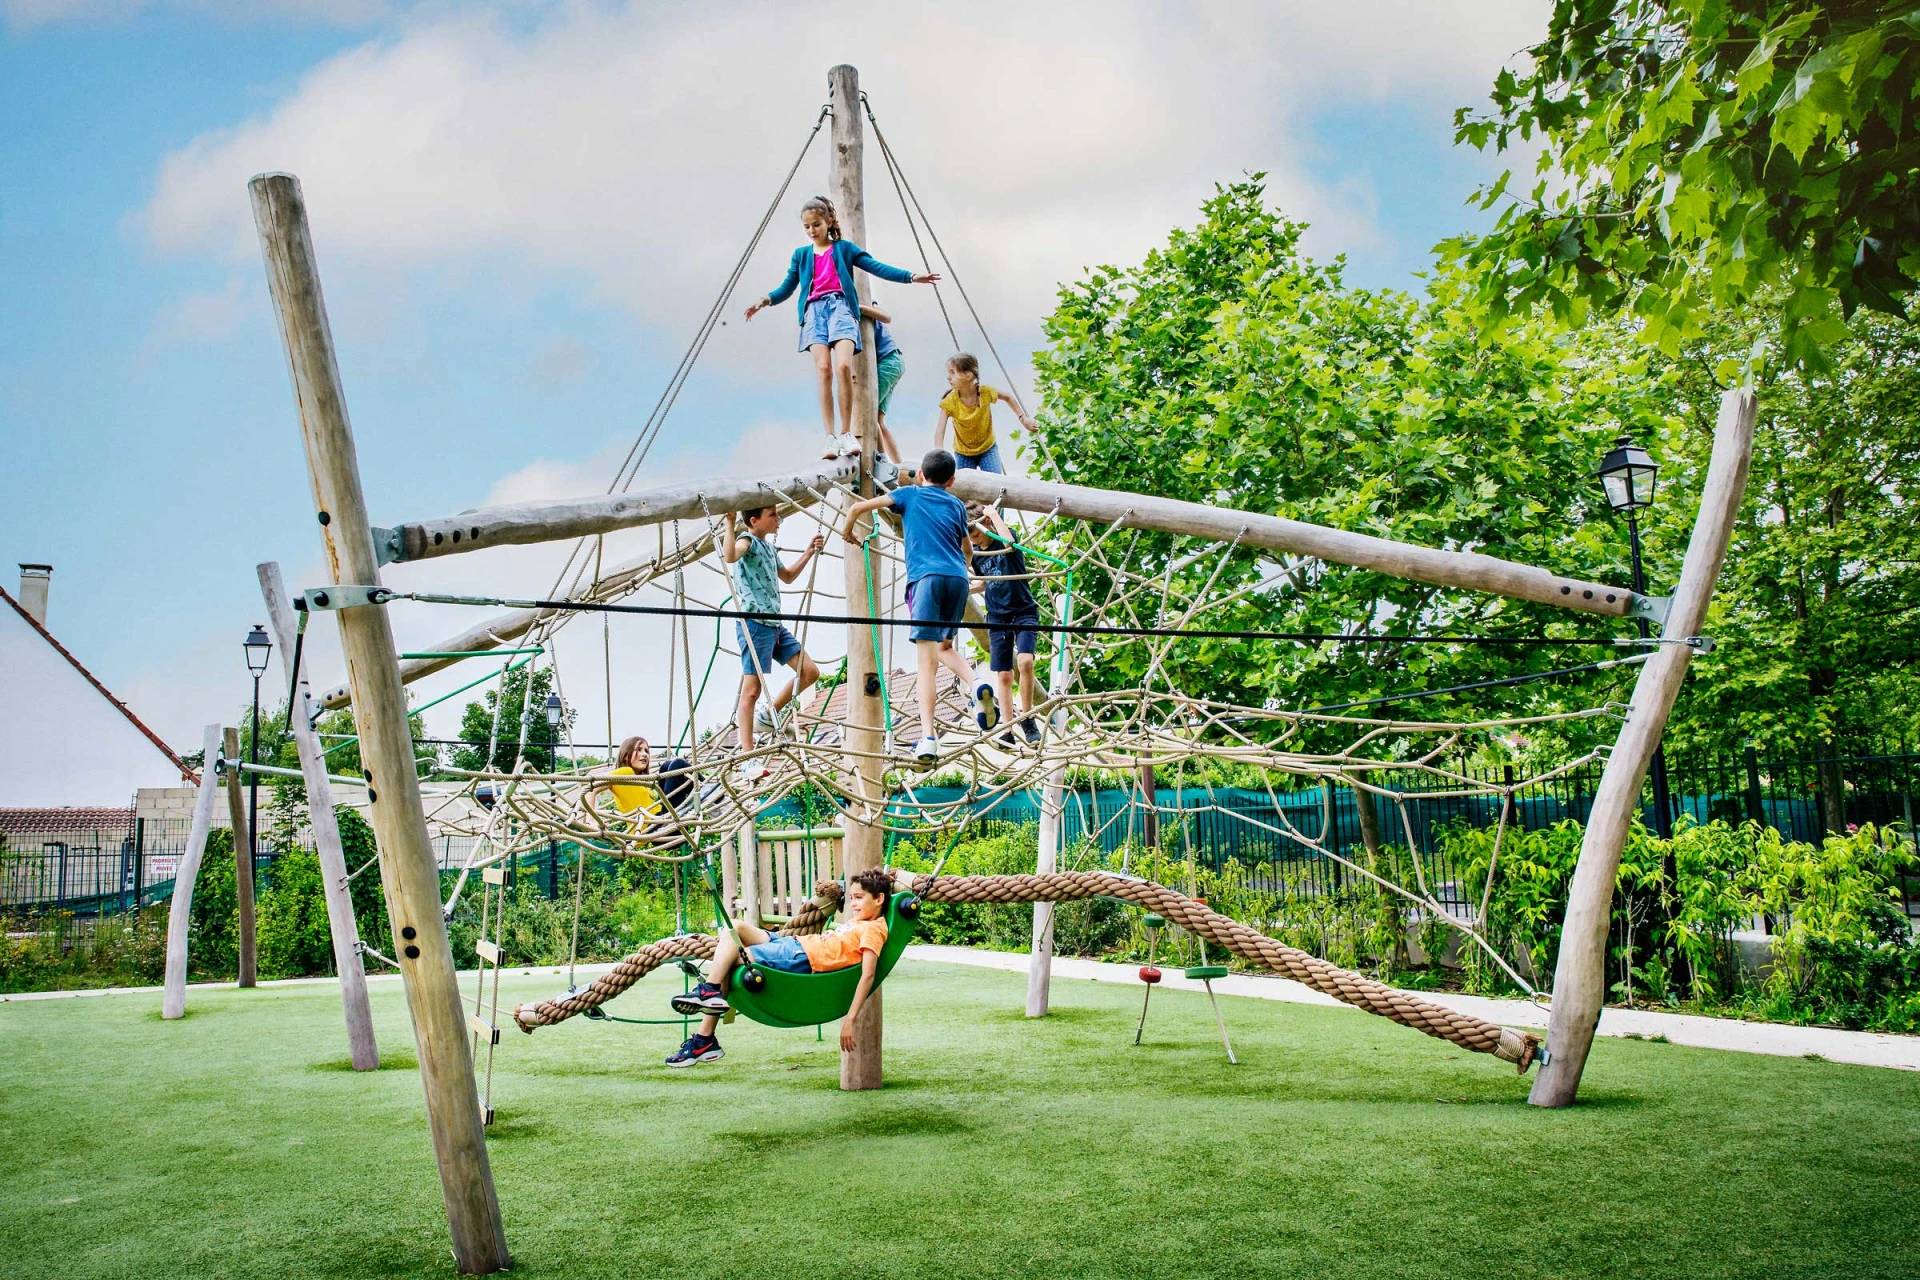 Kids playing on a natural wooden climbing structure